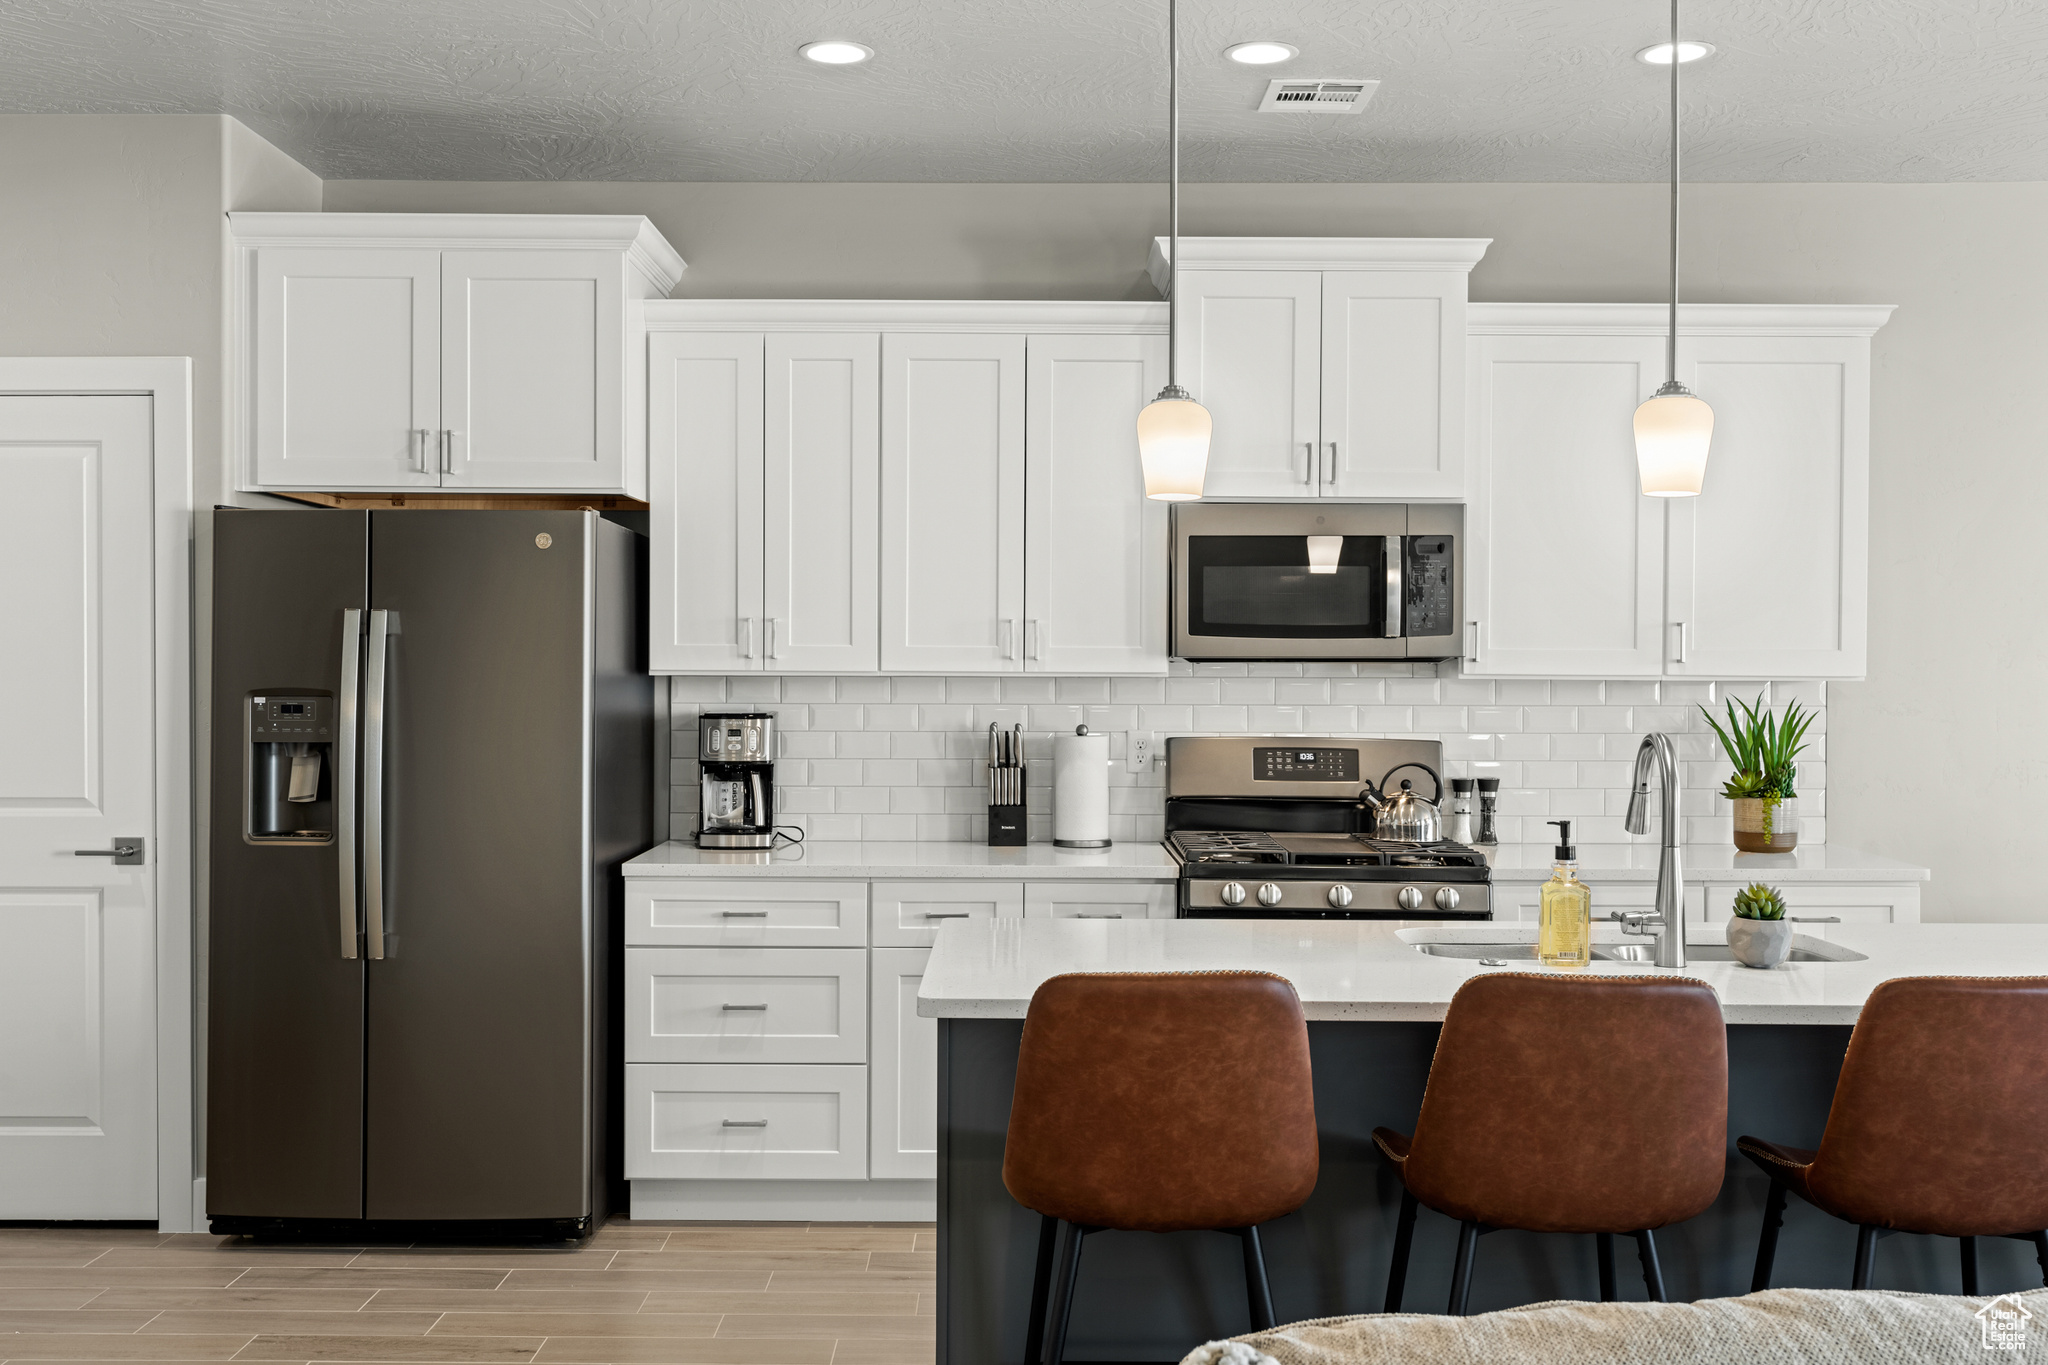 Kitchen featuring stainless steel appliances, white cabinets, and decorative light fixtures